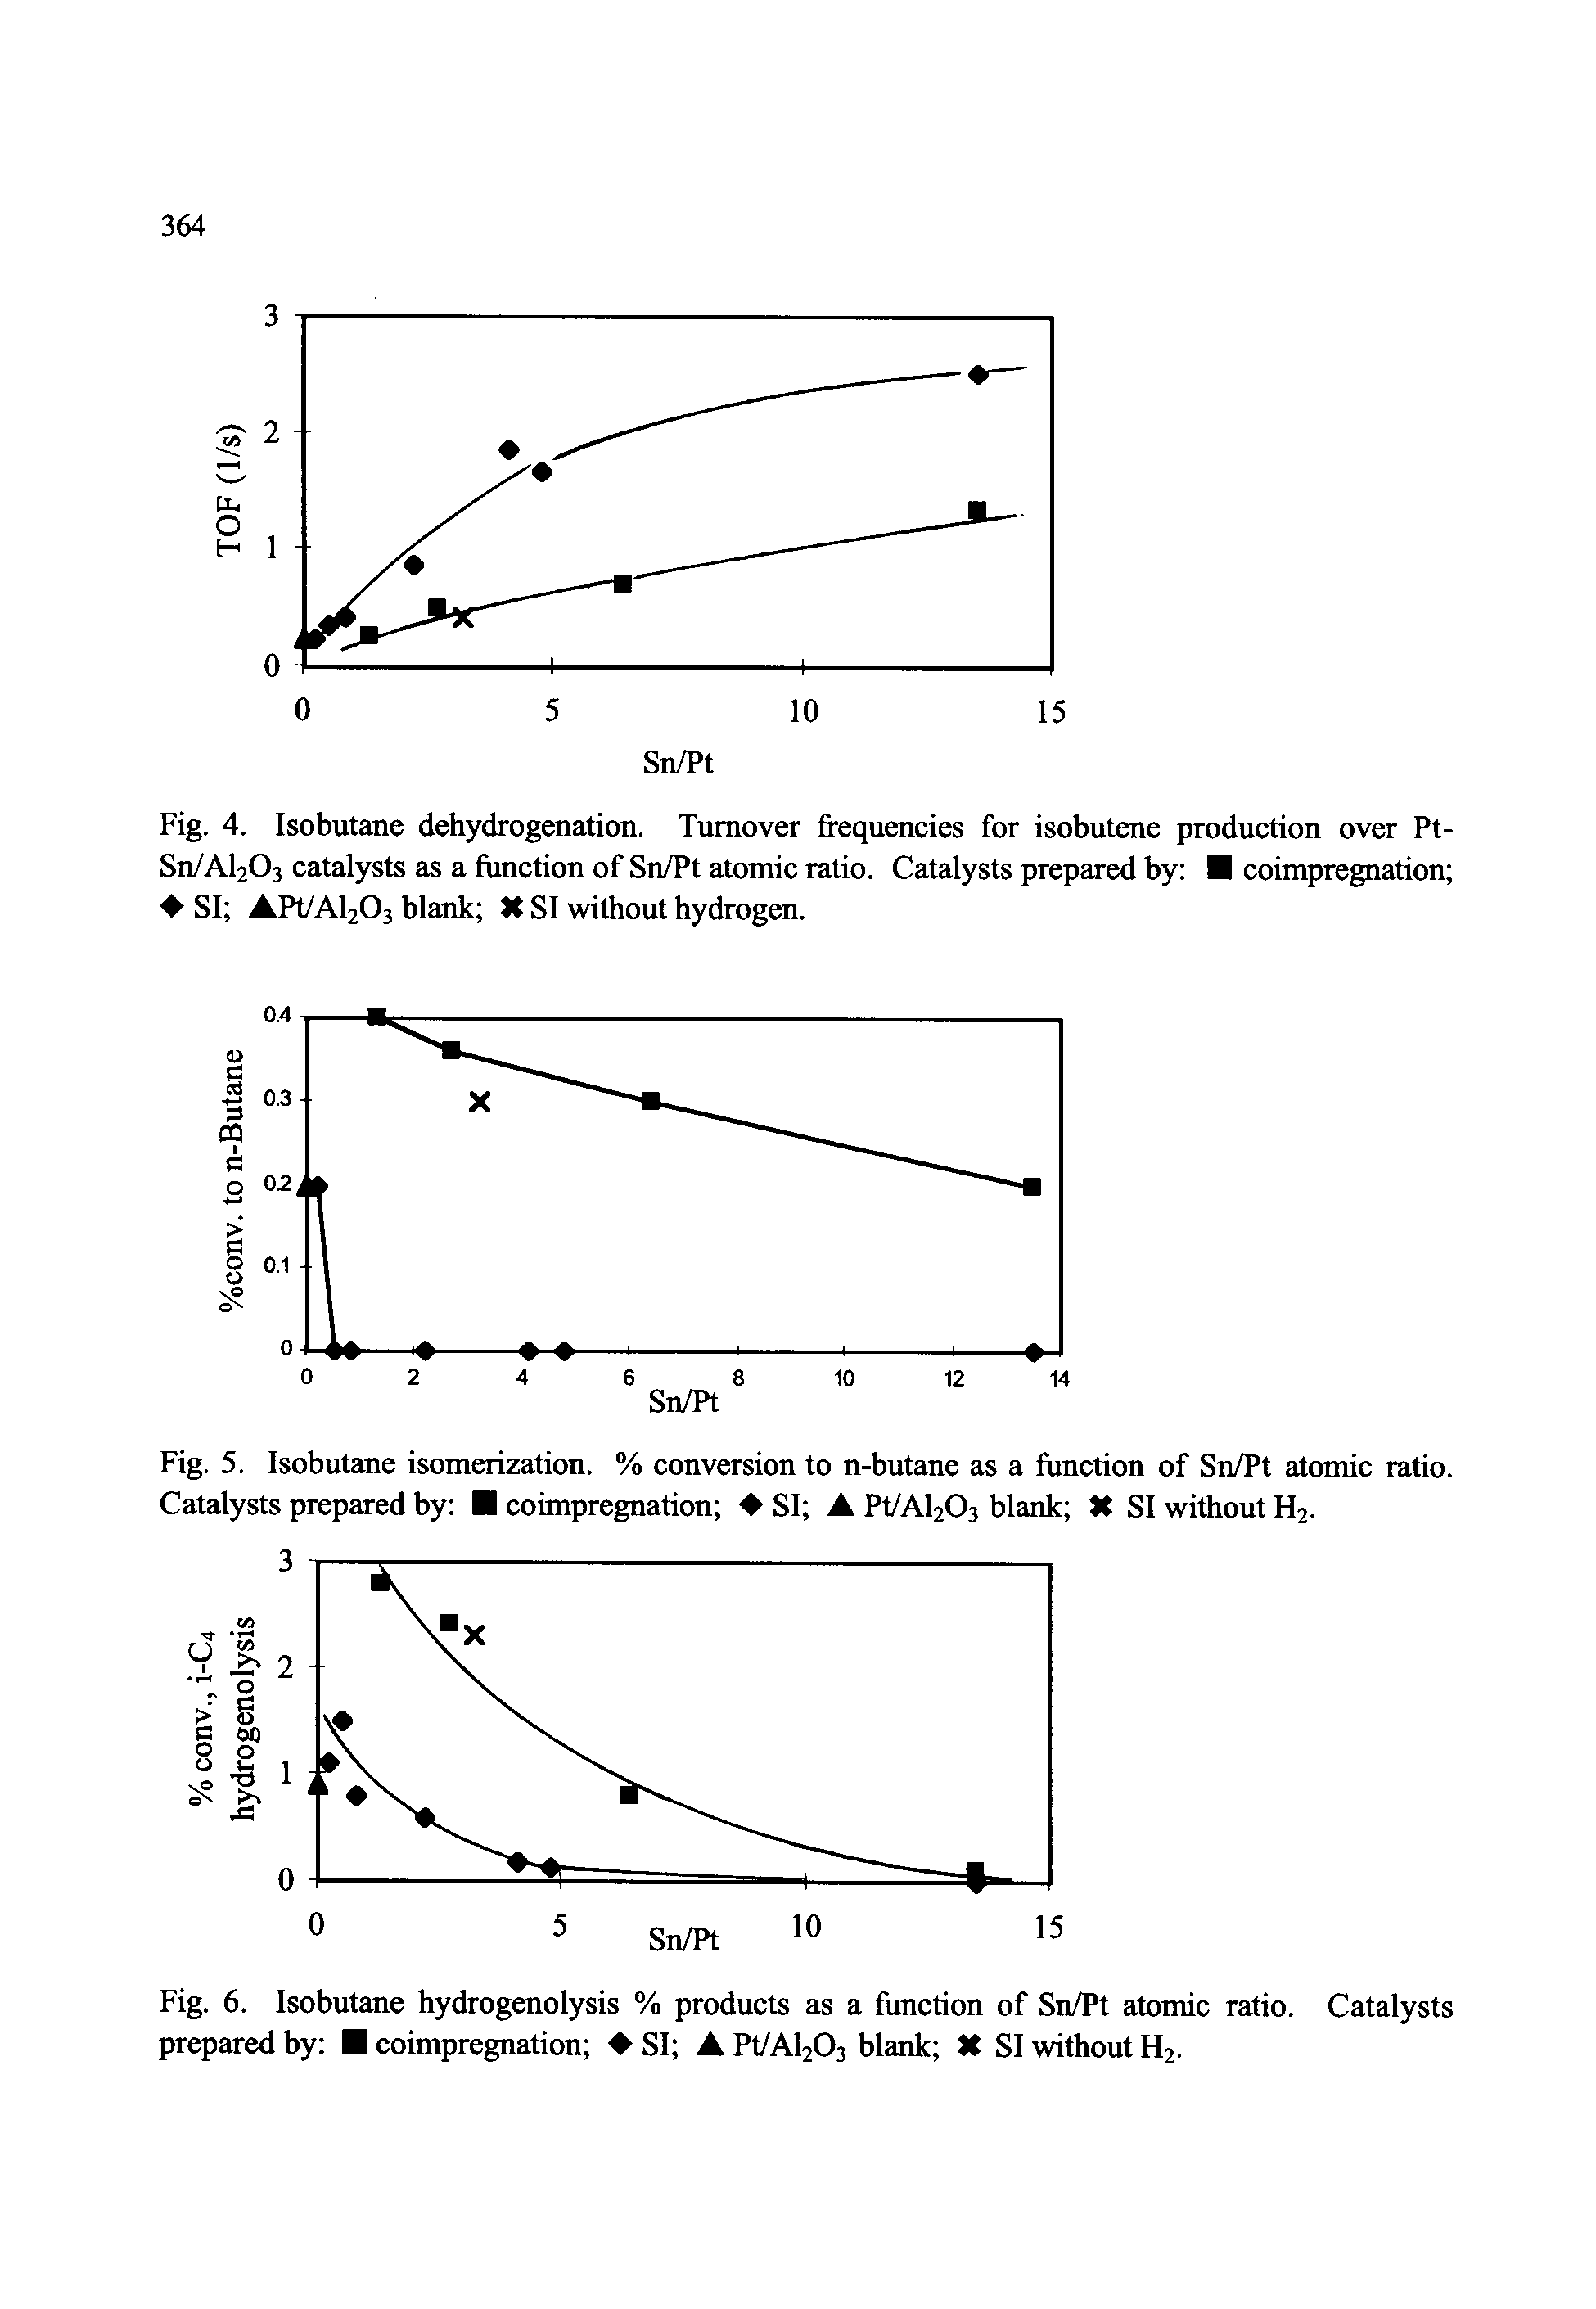 Fig. 4. Isobutane dehydrogenation. Turnover frequeneies for isobutene production over Pt-Sn/Al203 catalysts as a function of Sn/Pt atomic ratio. Catalysts prepared by I coimpregnation SI APt/Al203 blank SI without hydrogen.